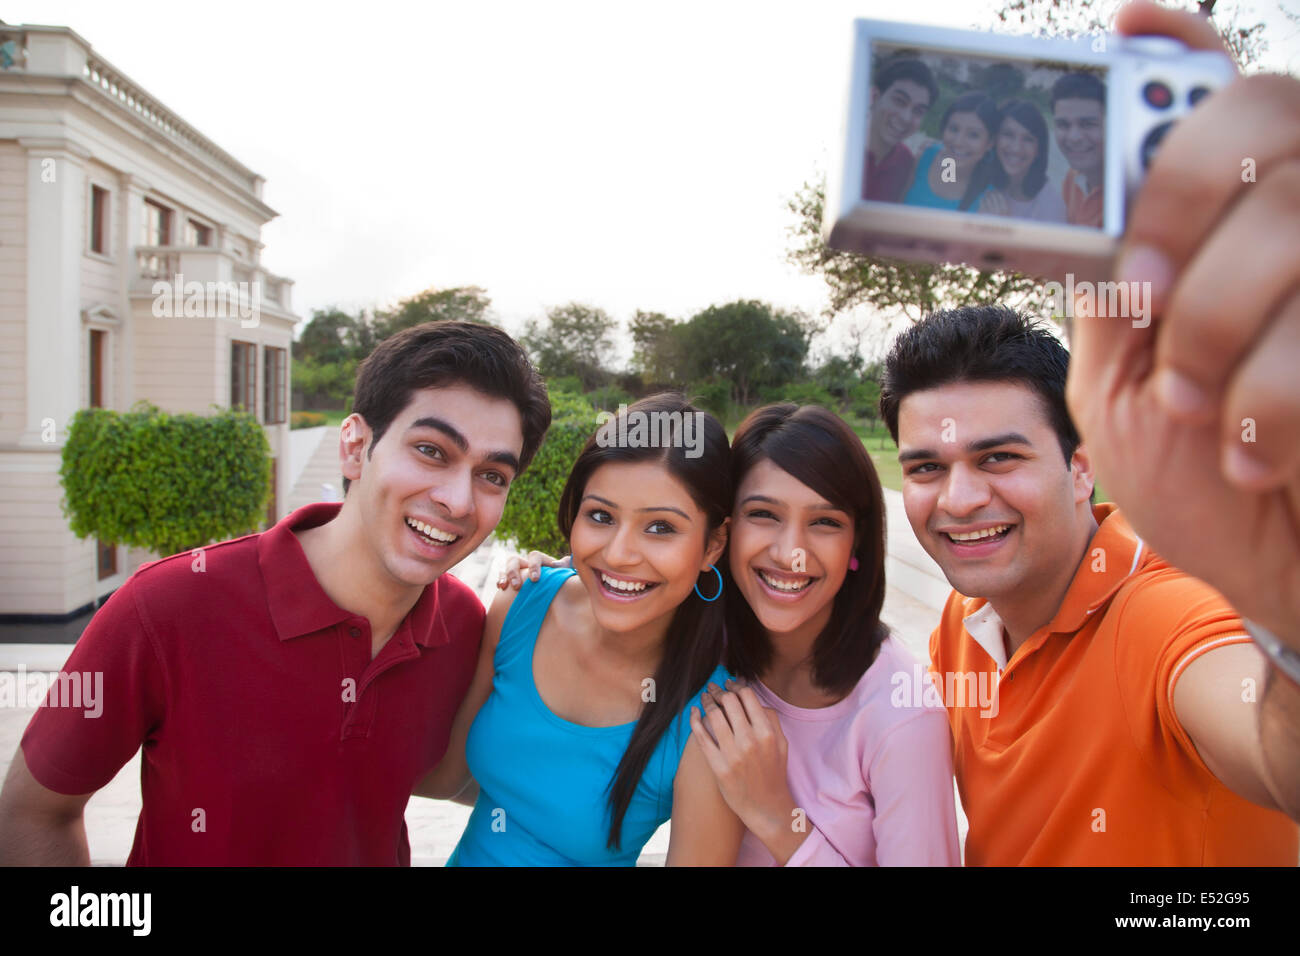 Cheerful friends taking selfie outdoors Stock Photo